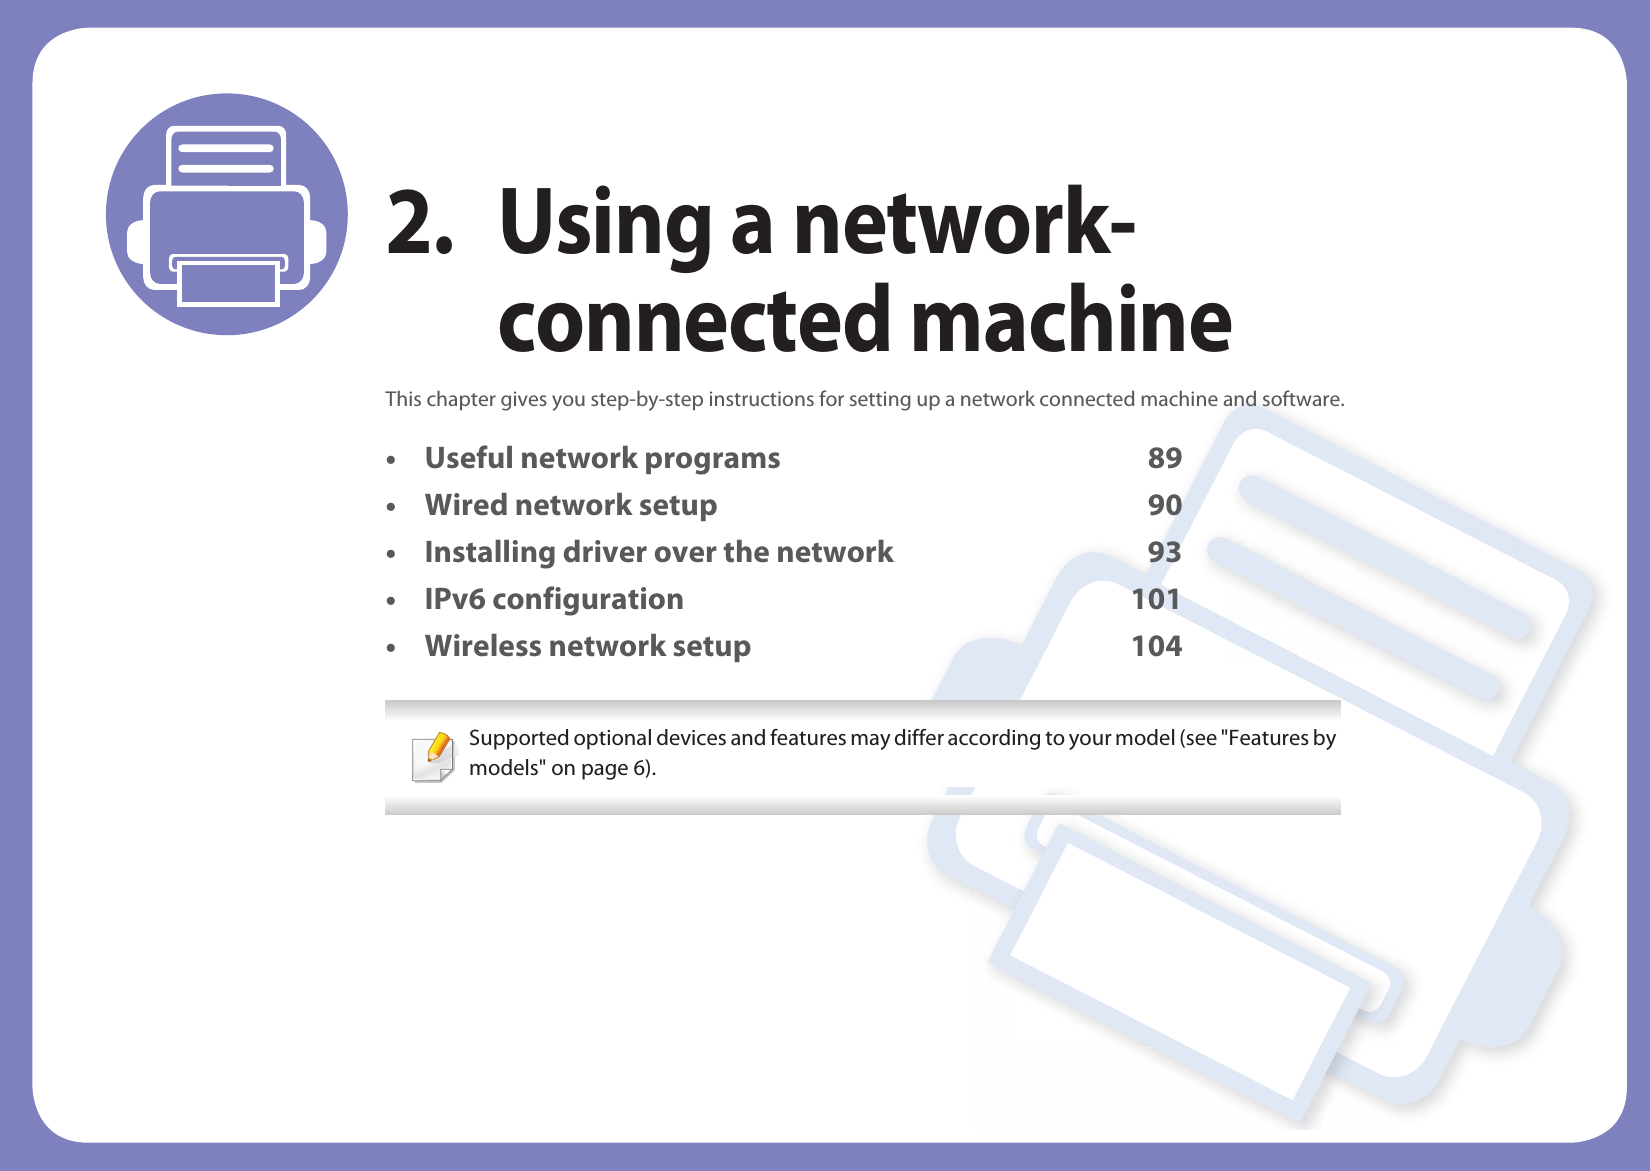 2. Using a network-connected machineThis chapter gives you step-by-step instructions for setting up a network connected machine and software.• Useful network programs 89• Wired network setup 90• Installing driver over the network 93• IPv6 configuration 101• Wireless network setup 104 Supported optional devices and features may differ according to your model (see &quot;Features by models&quot; on page 6). 